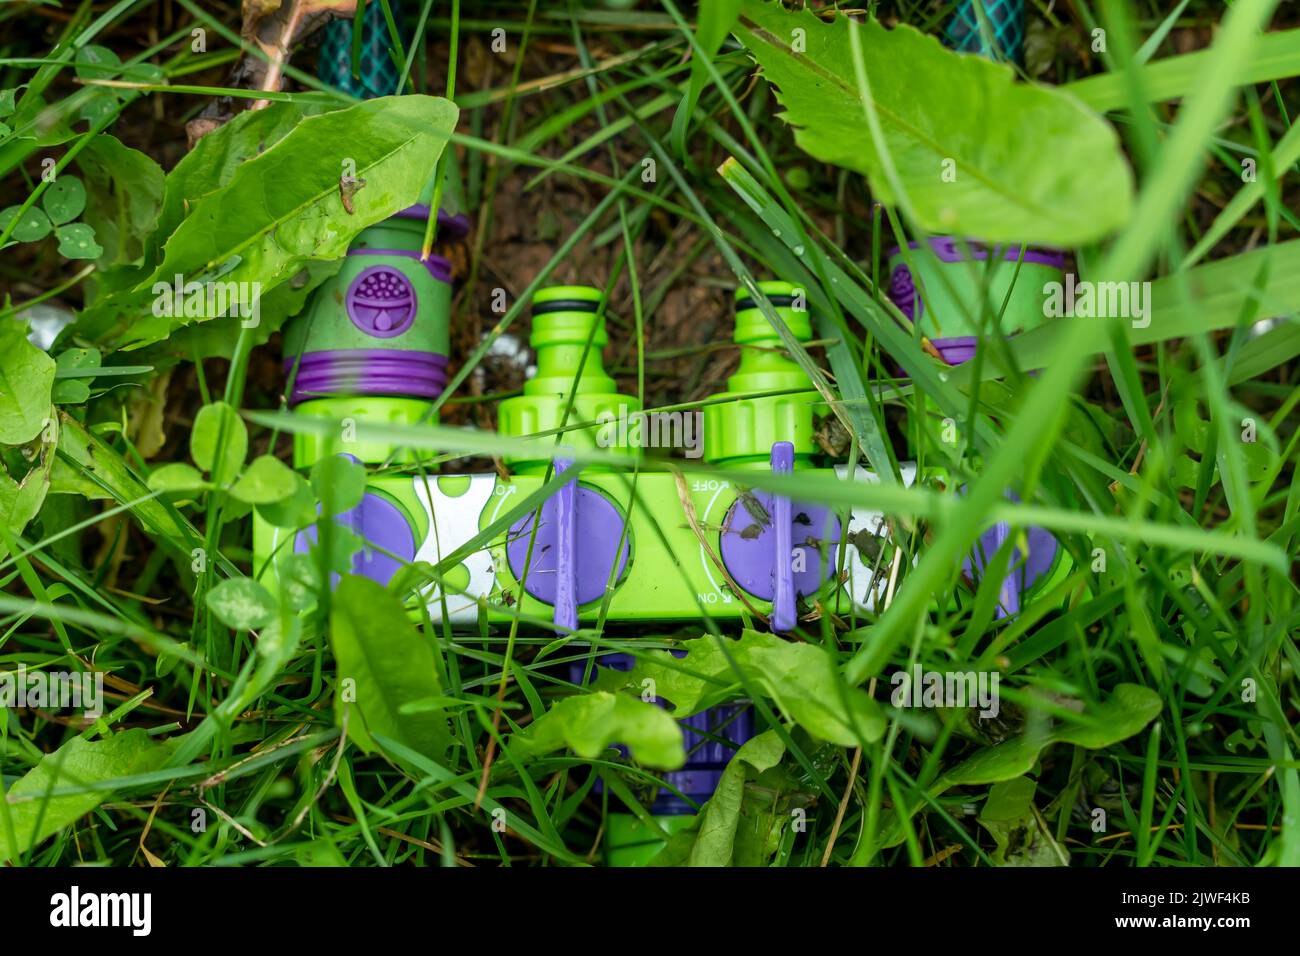 a plastic splitter for watering hoses lies on the green grass. Stock Photo